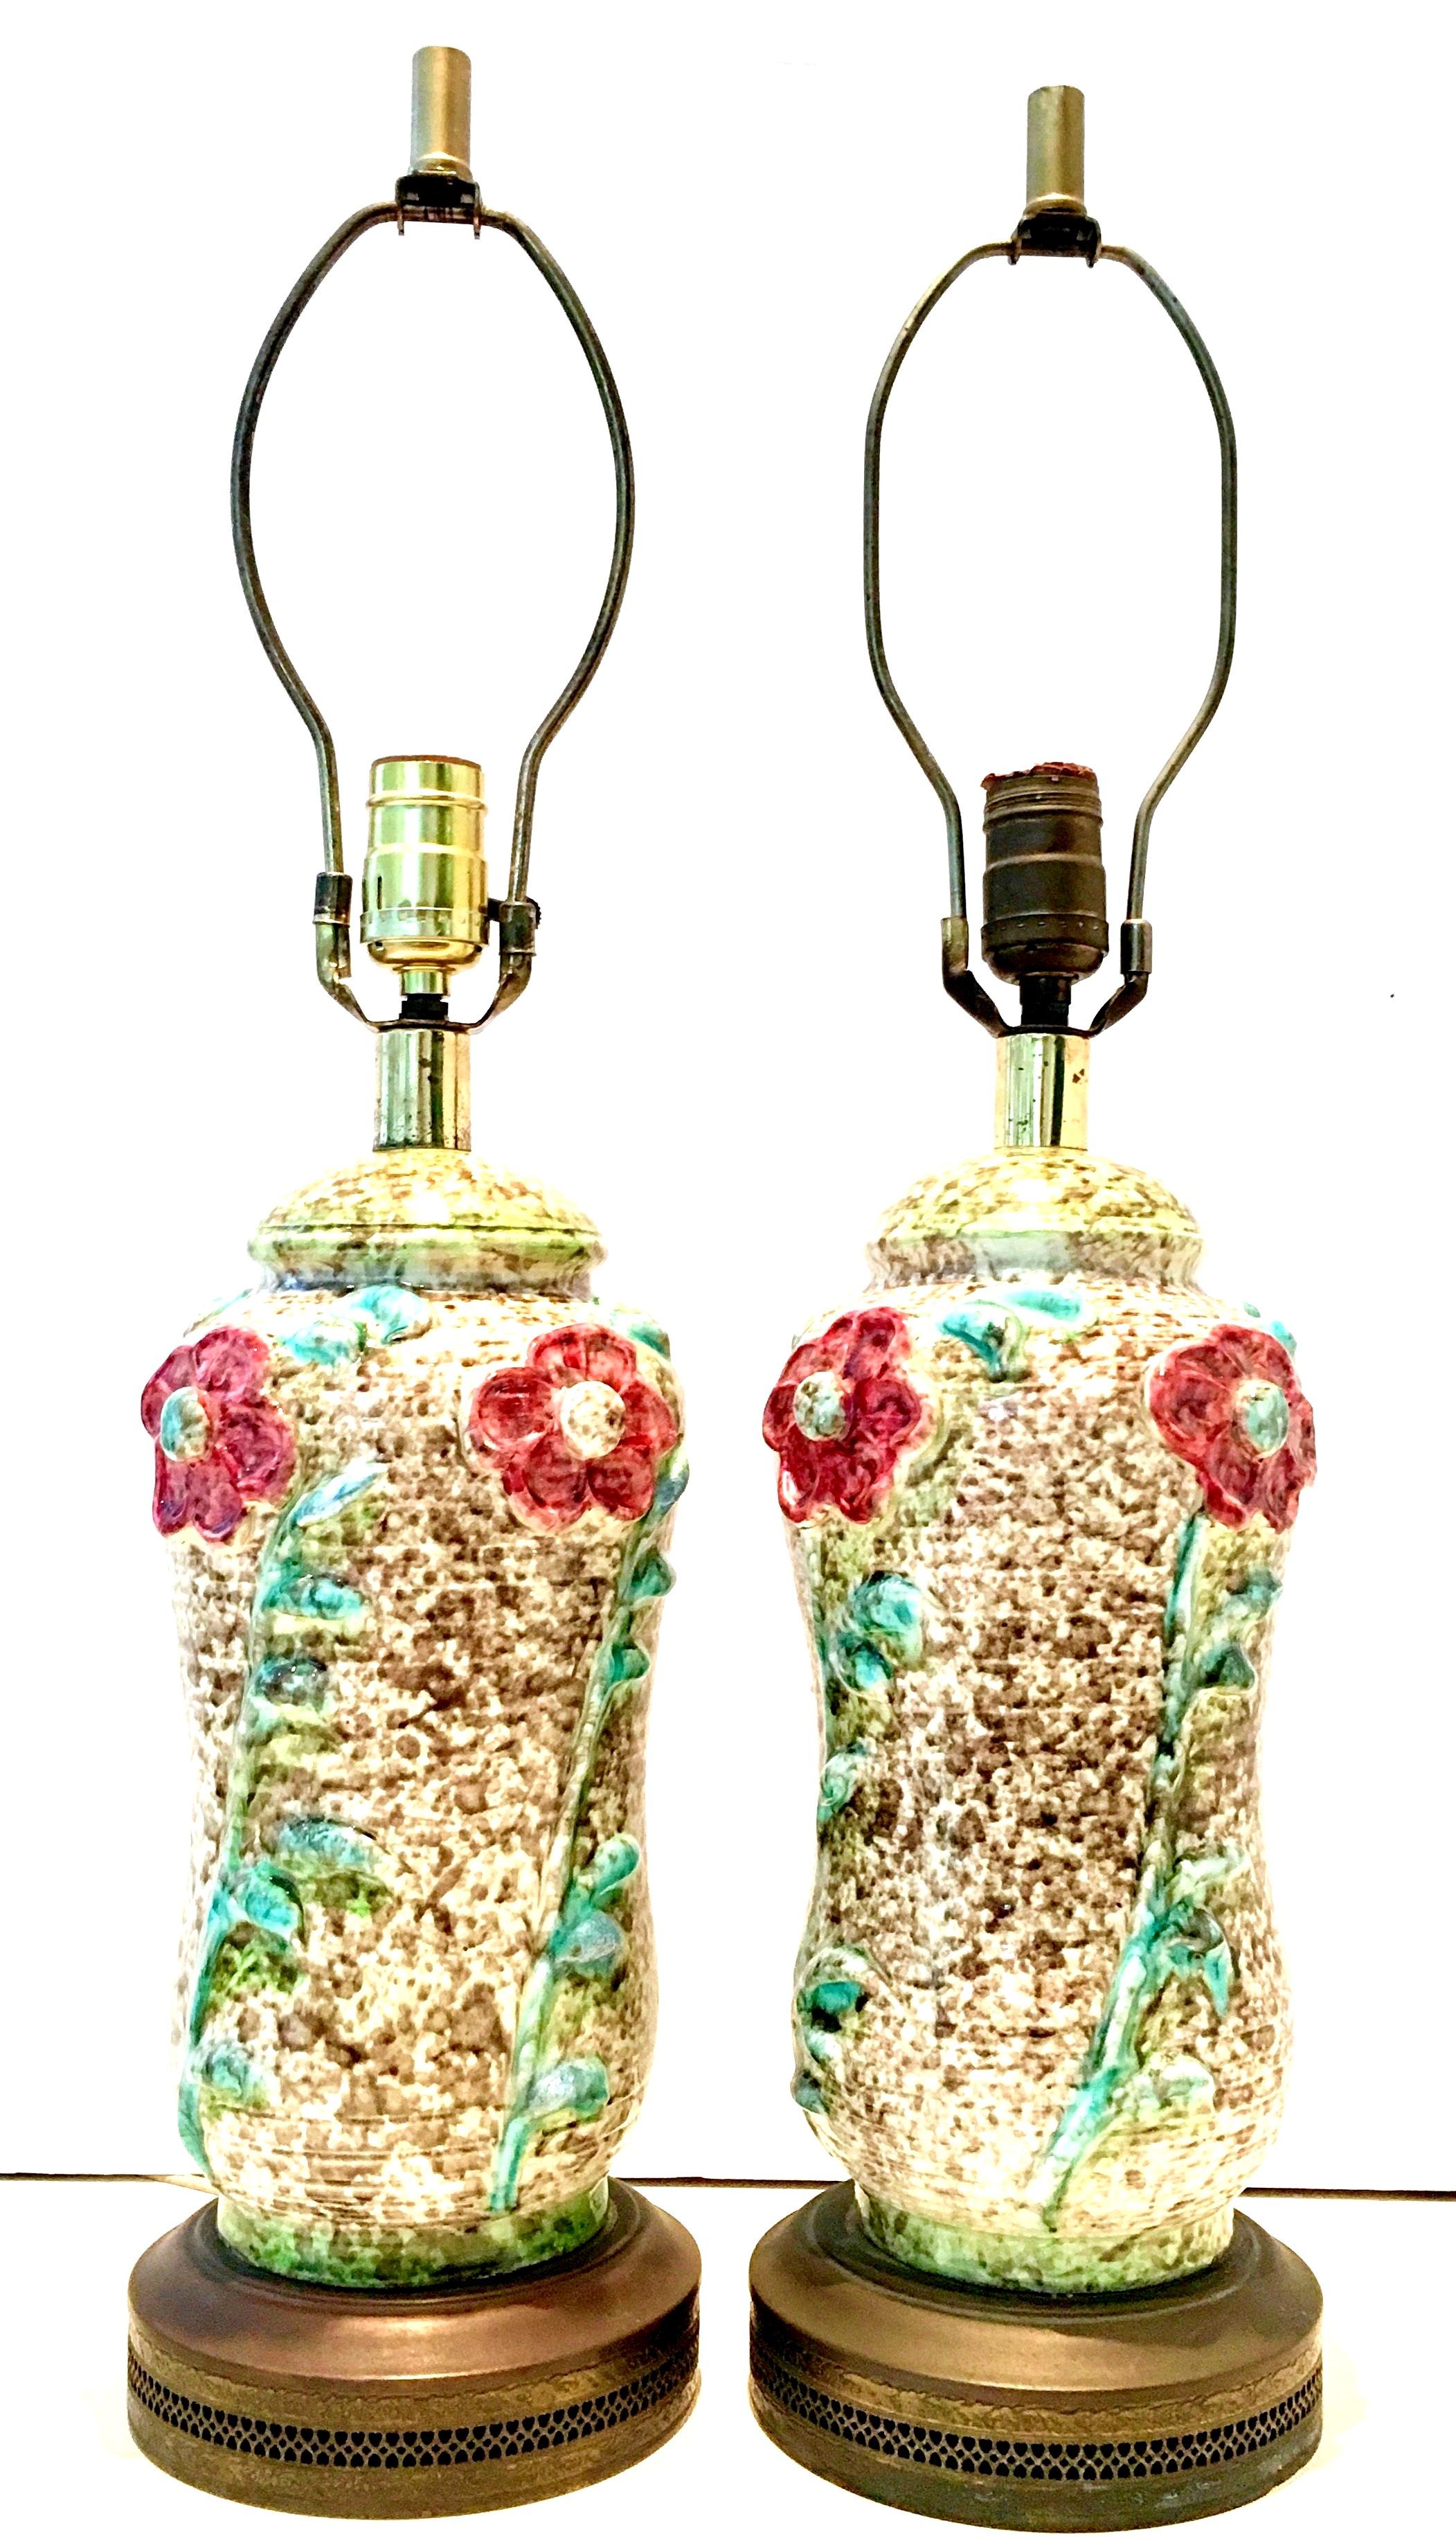 Mid-20th century Art Nouveau pair of ceramic glaze and gilt brass floral motif table lamps. These most unique, whimsical and extraordinary handmade lamps feature a white and wheat ground with textured, raised and incredibly executed floral motif in